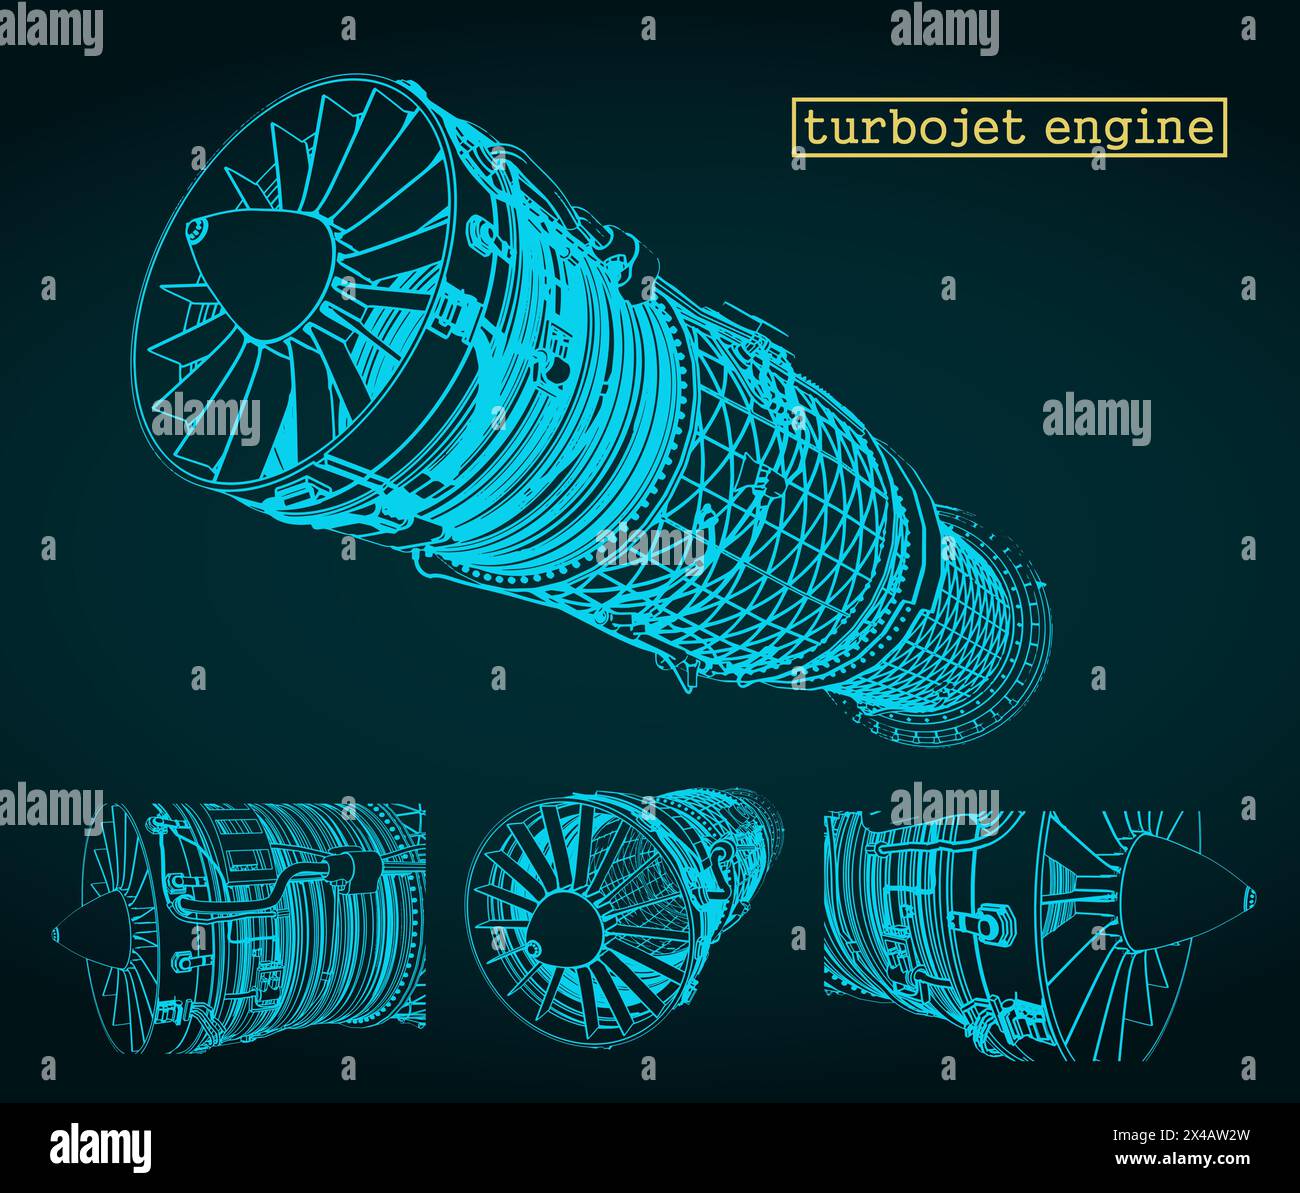 Stylized vector illustration of drawings of a turbojet engine Stock Vector